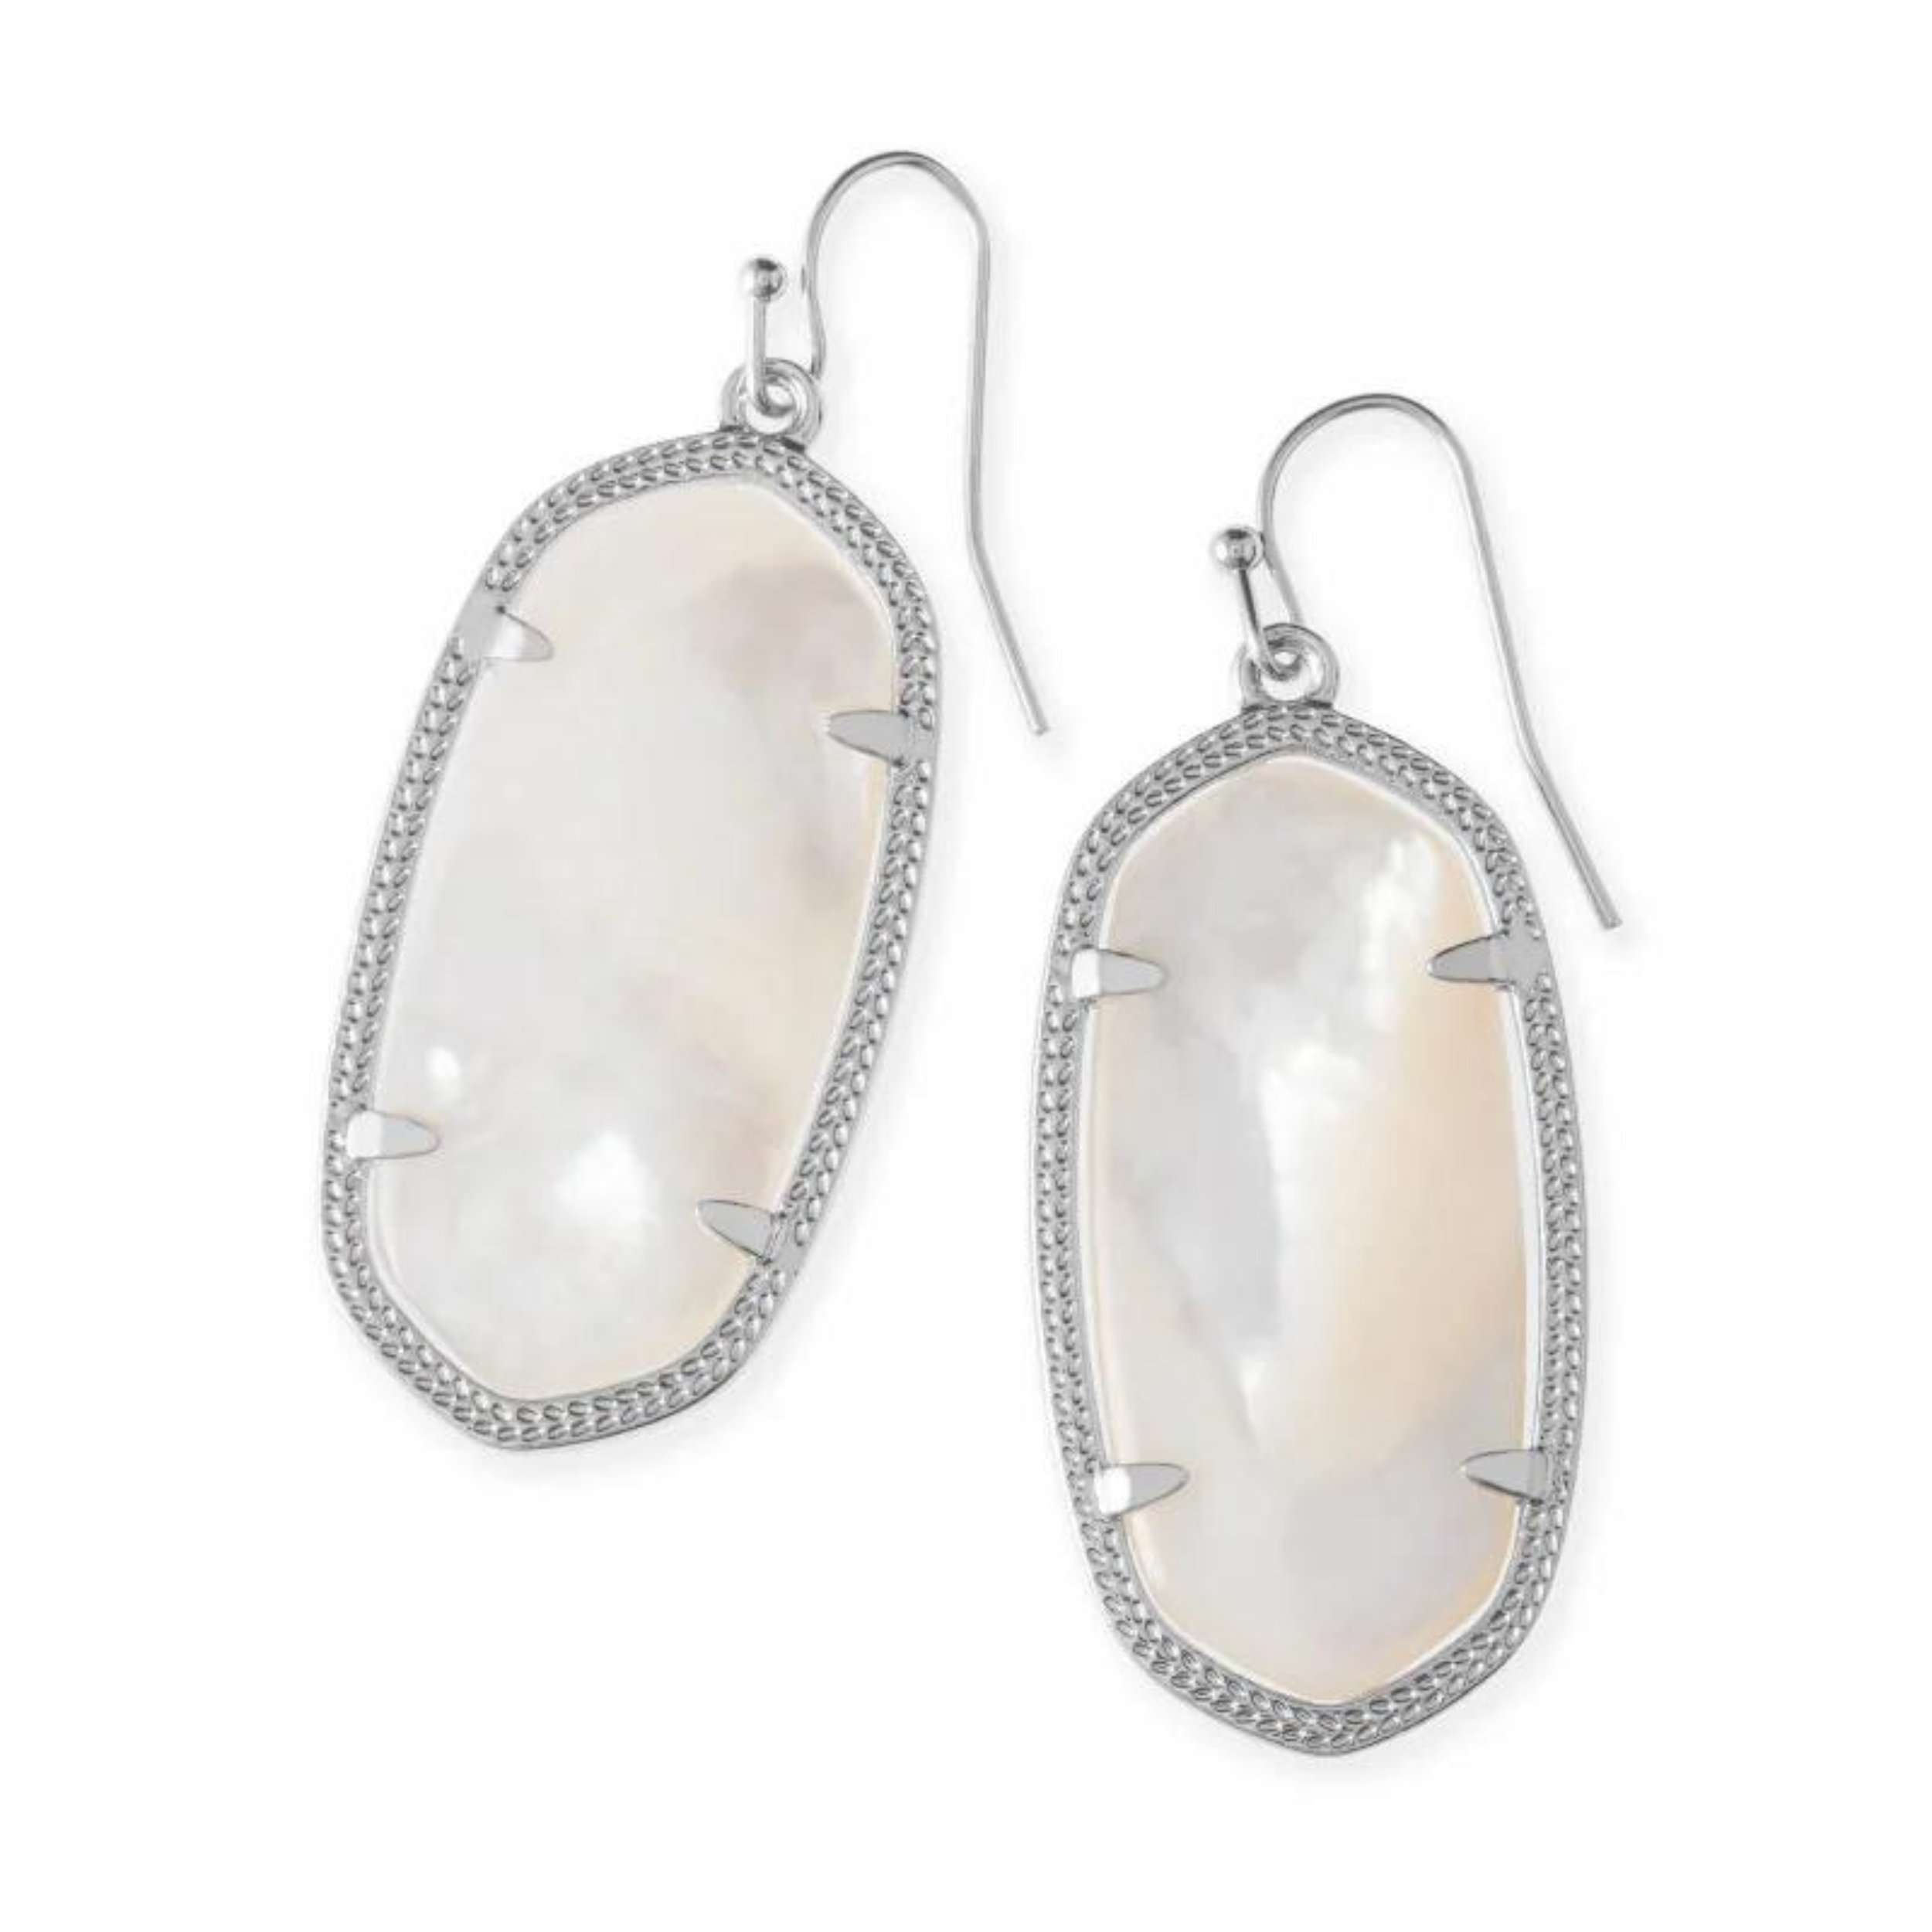 Silver drop dangle earrings with ivory pearl stone centers pictured on a white background.